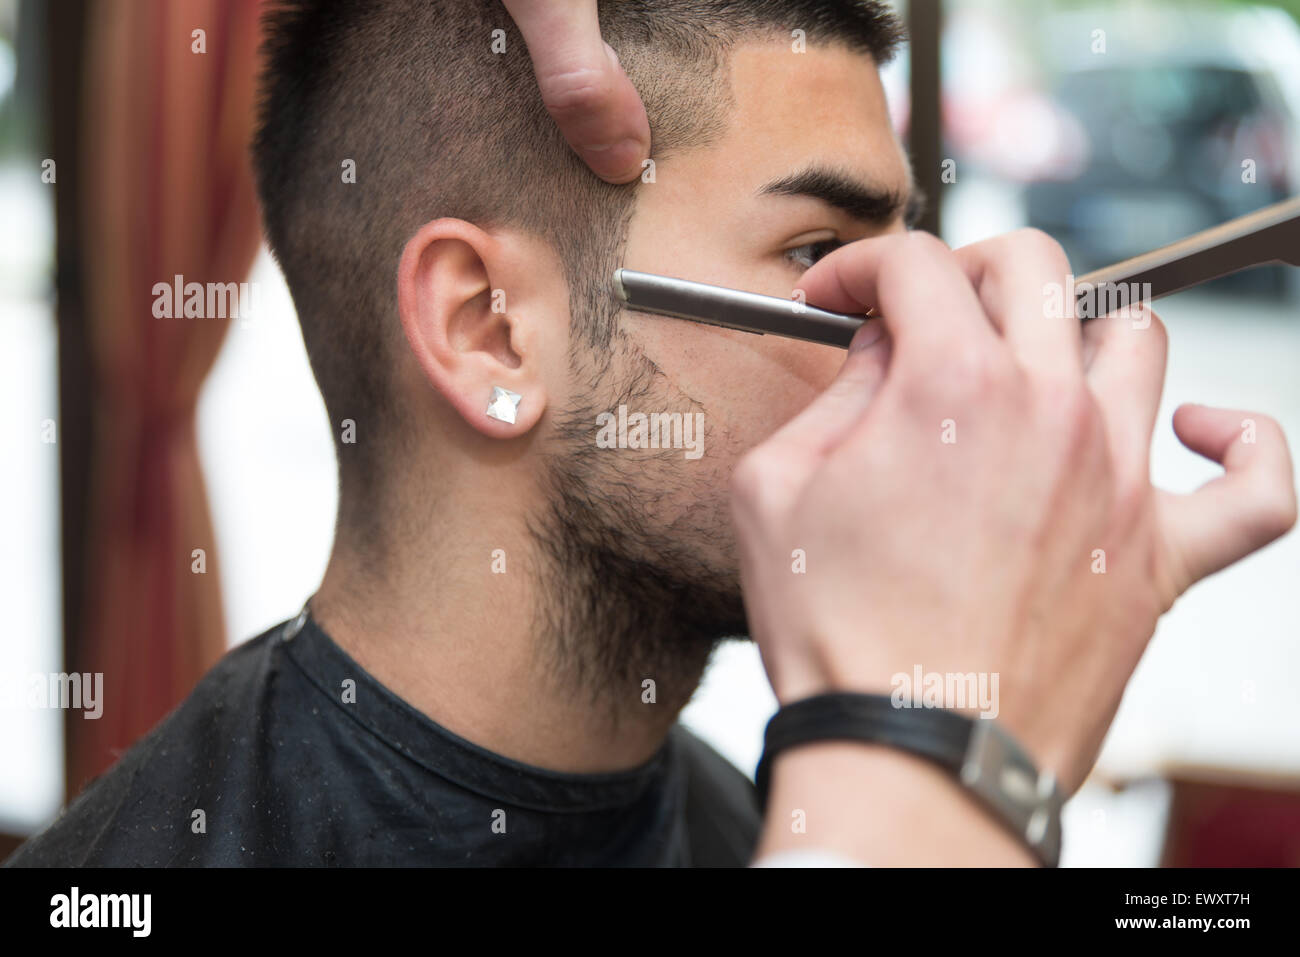 Handsome Young Hairdresser Giving A New Haircut To Male Customer At Parlor Stock Photo